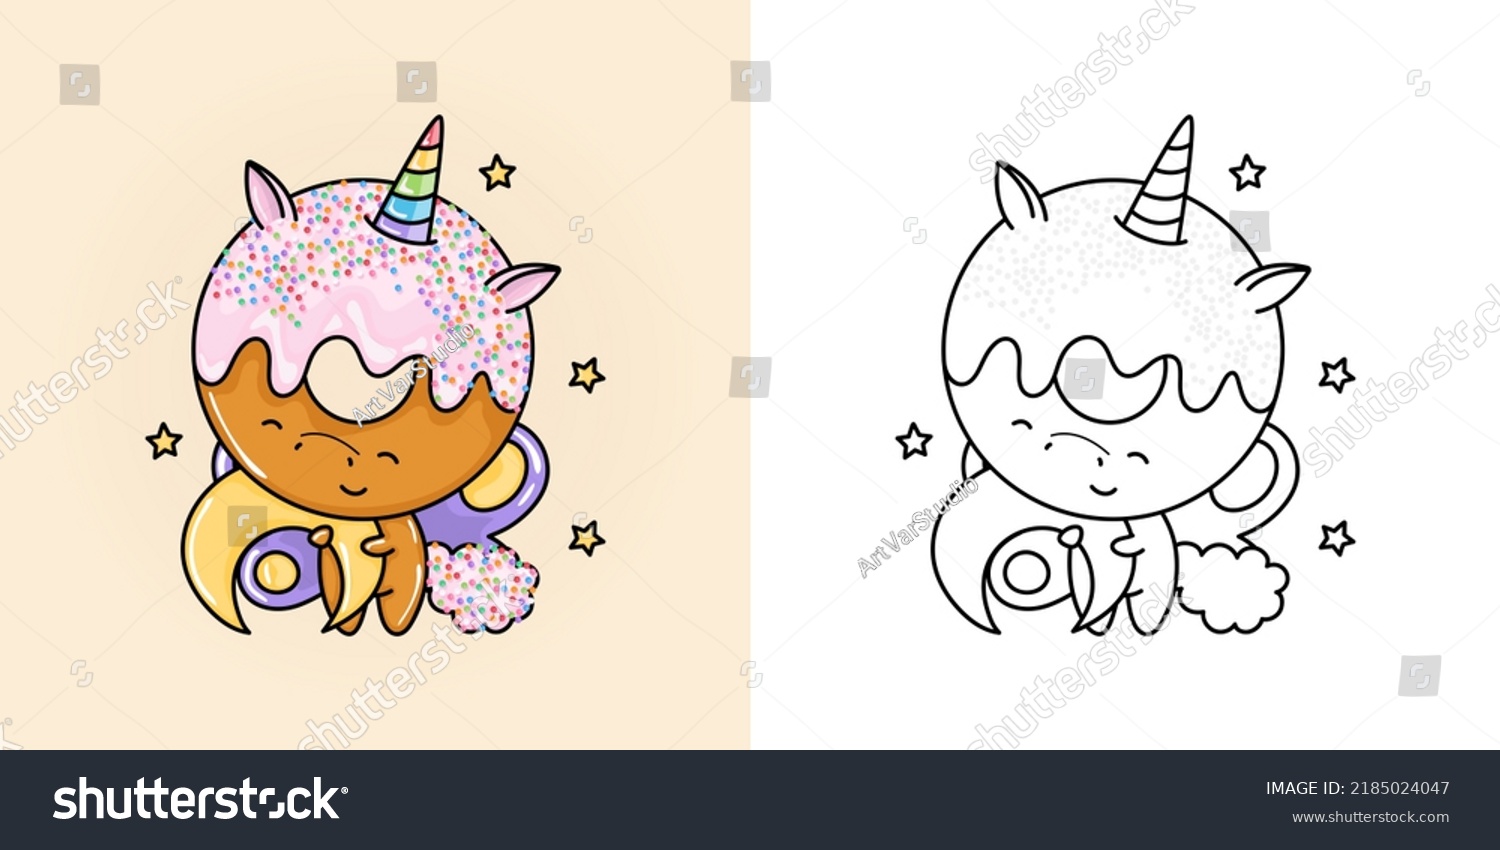 SVG of Unicorn Donut Clipart for Coloring Page and Multicolored Illustration. Adorable Clip Art Unicorn. Vector Illustration of a Kawaii Animal for Coloring Pages, Prints for Clothes, Stickers, Baby Shower.
 svg